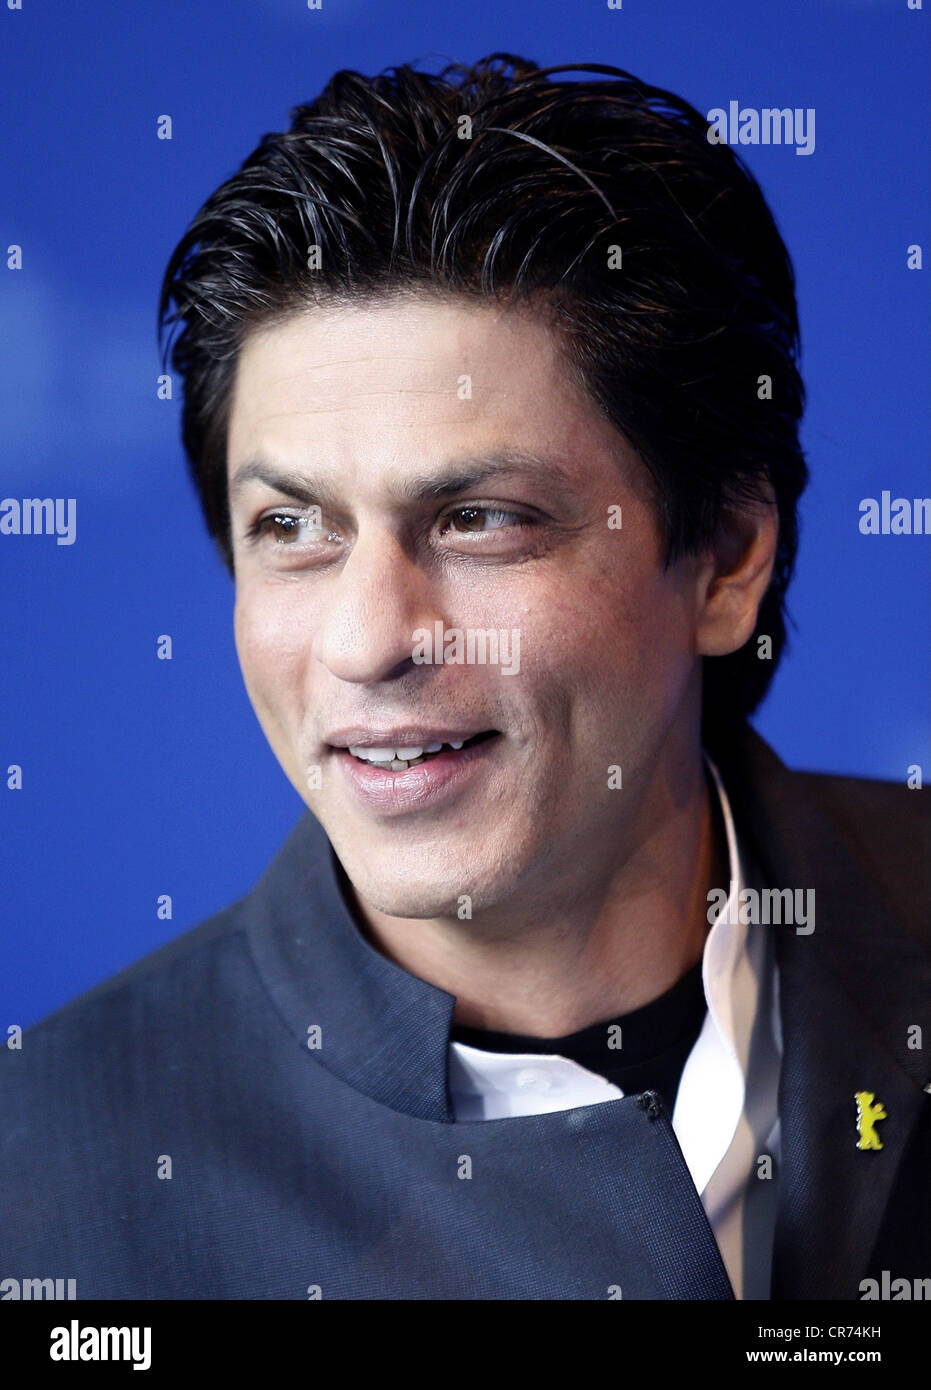 Khan, Shahrukh, * 2.11.1965, Indian actor, portrait, photo call to 'My Name is Khan', Berlinale, Berlin, 12.2.2010, Stock Photo